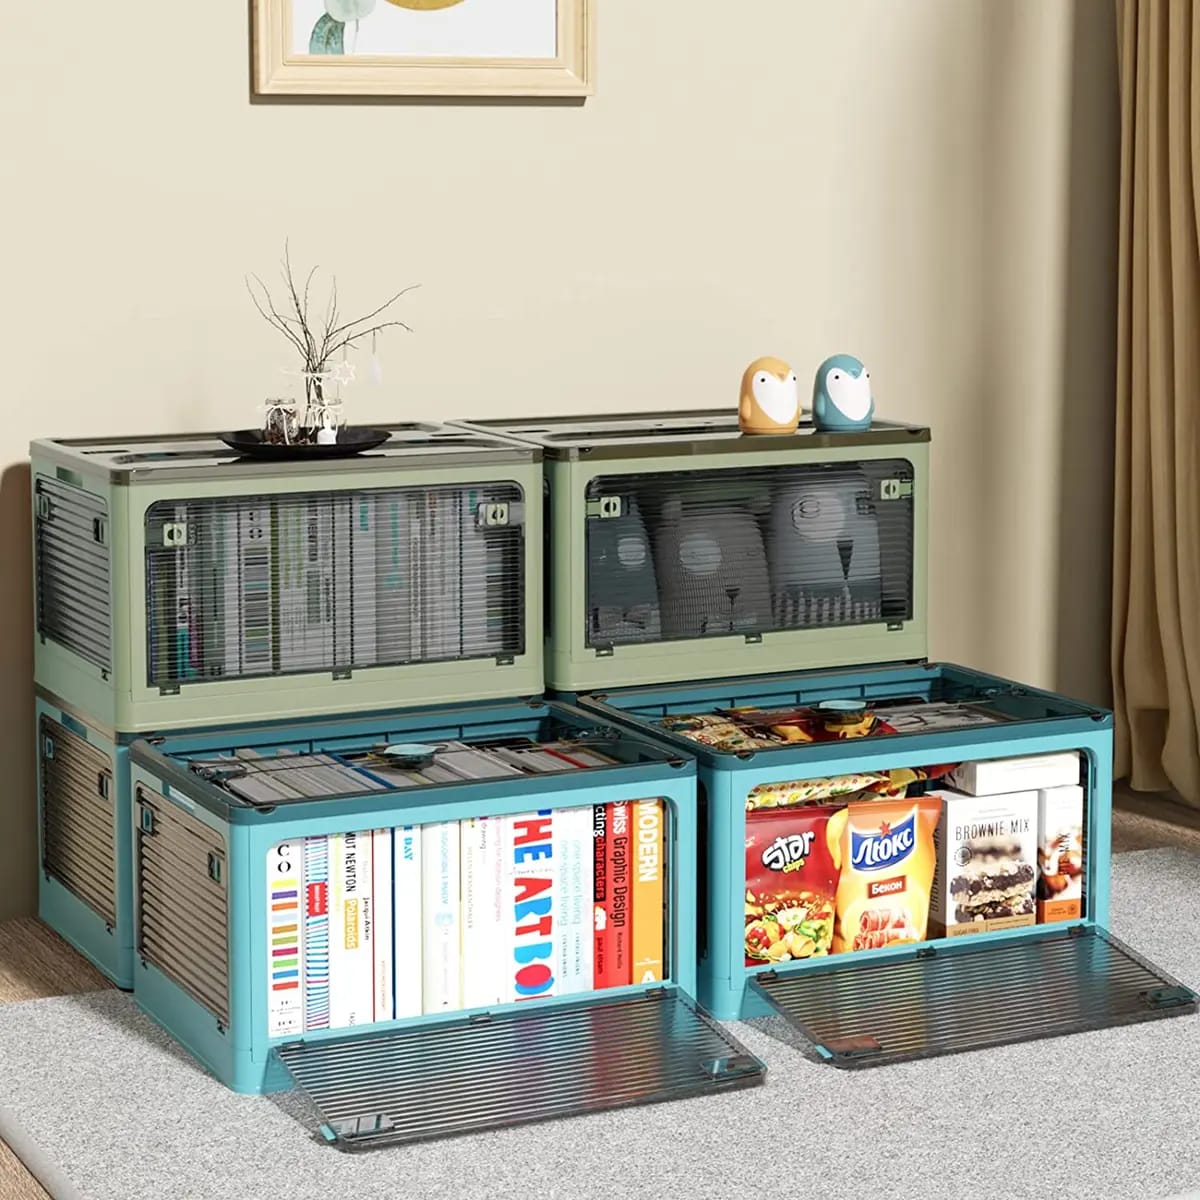 4 Foldable Transparent Storage Box with Wheels 2 in green and 2 in blue color placed in a room